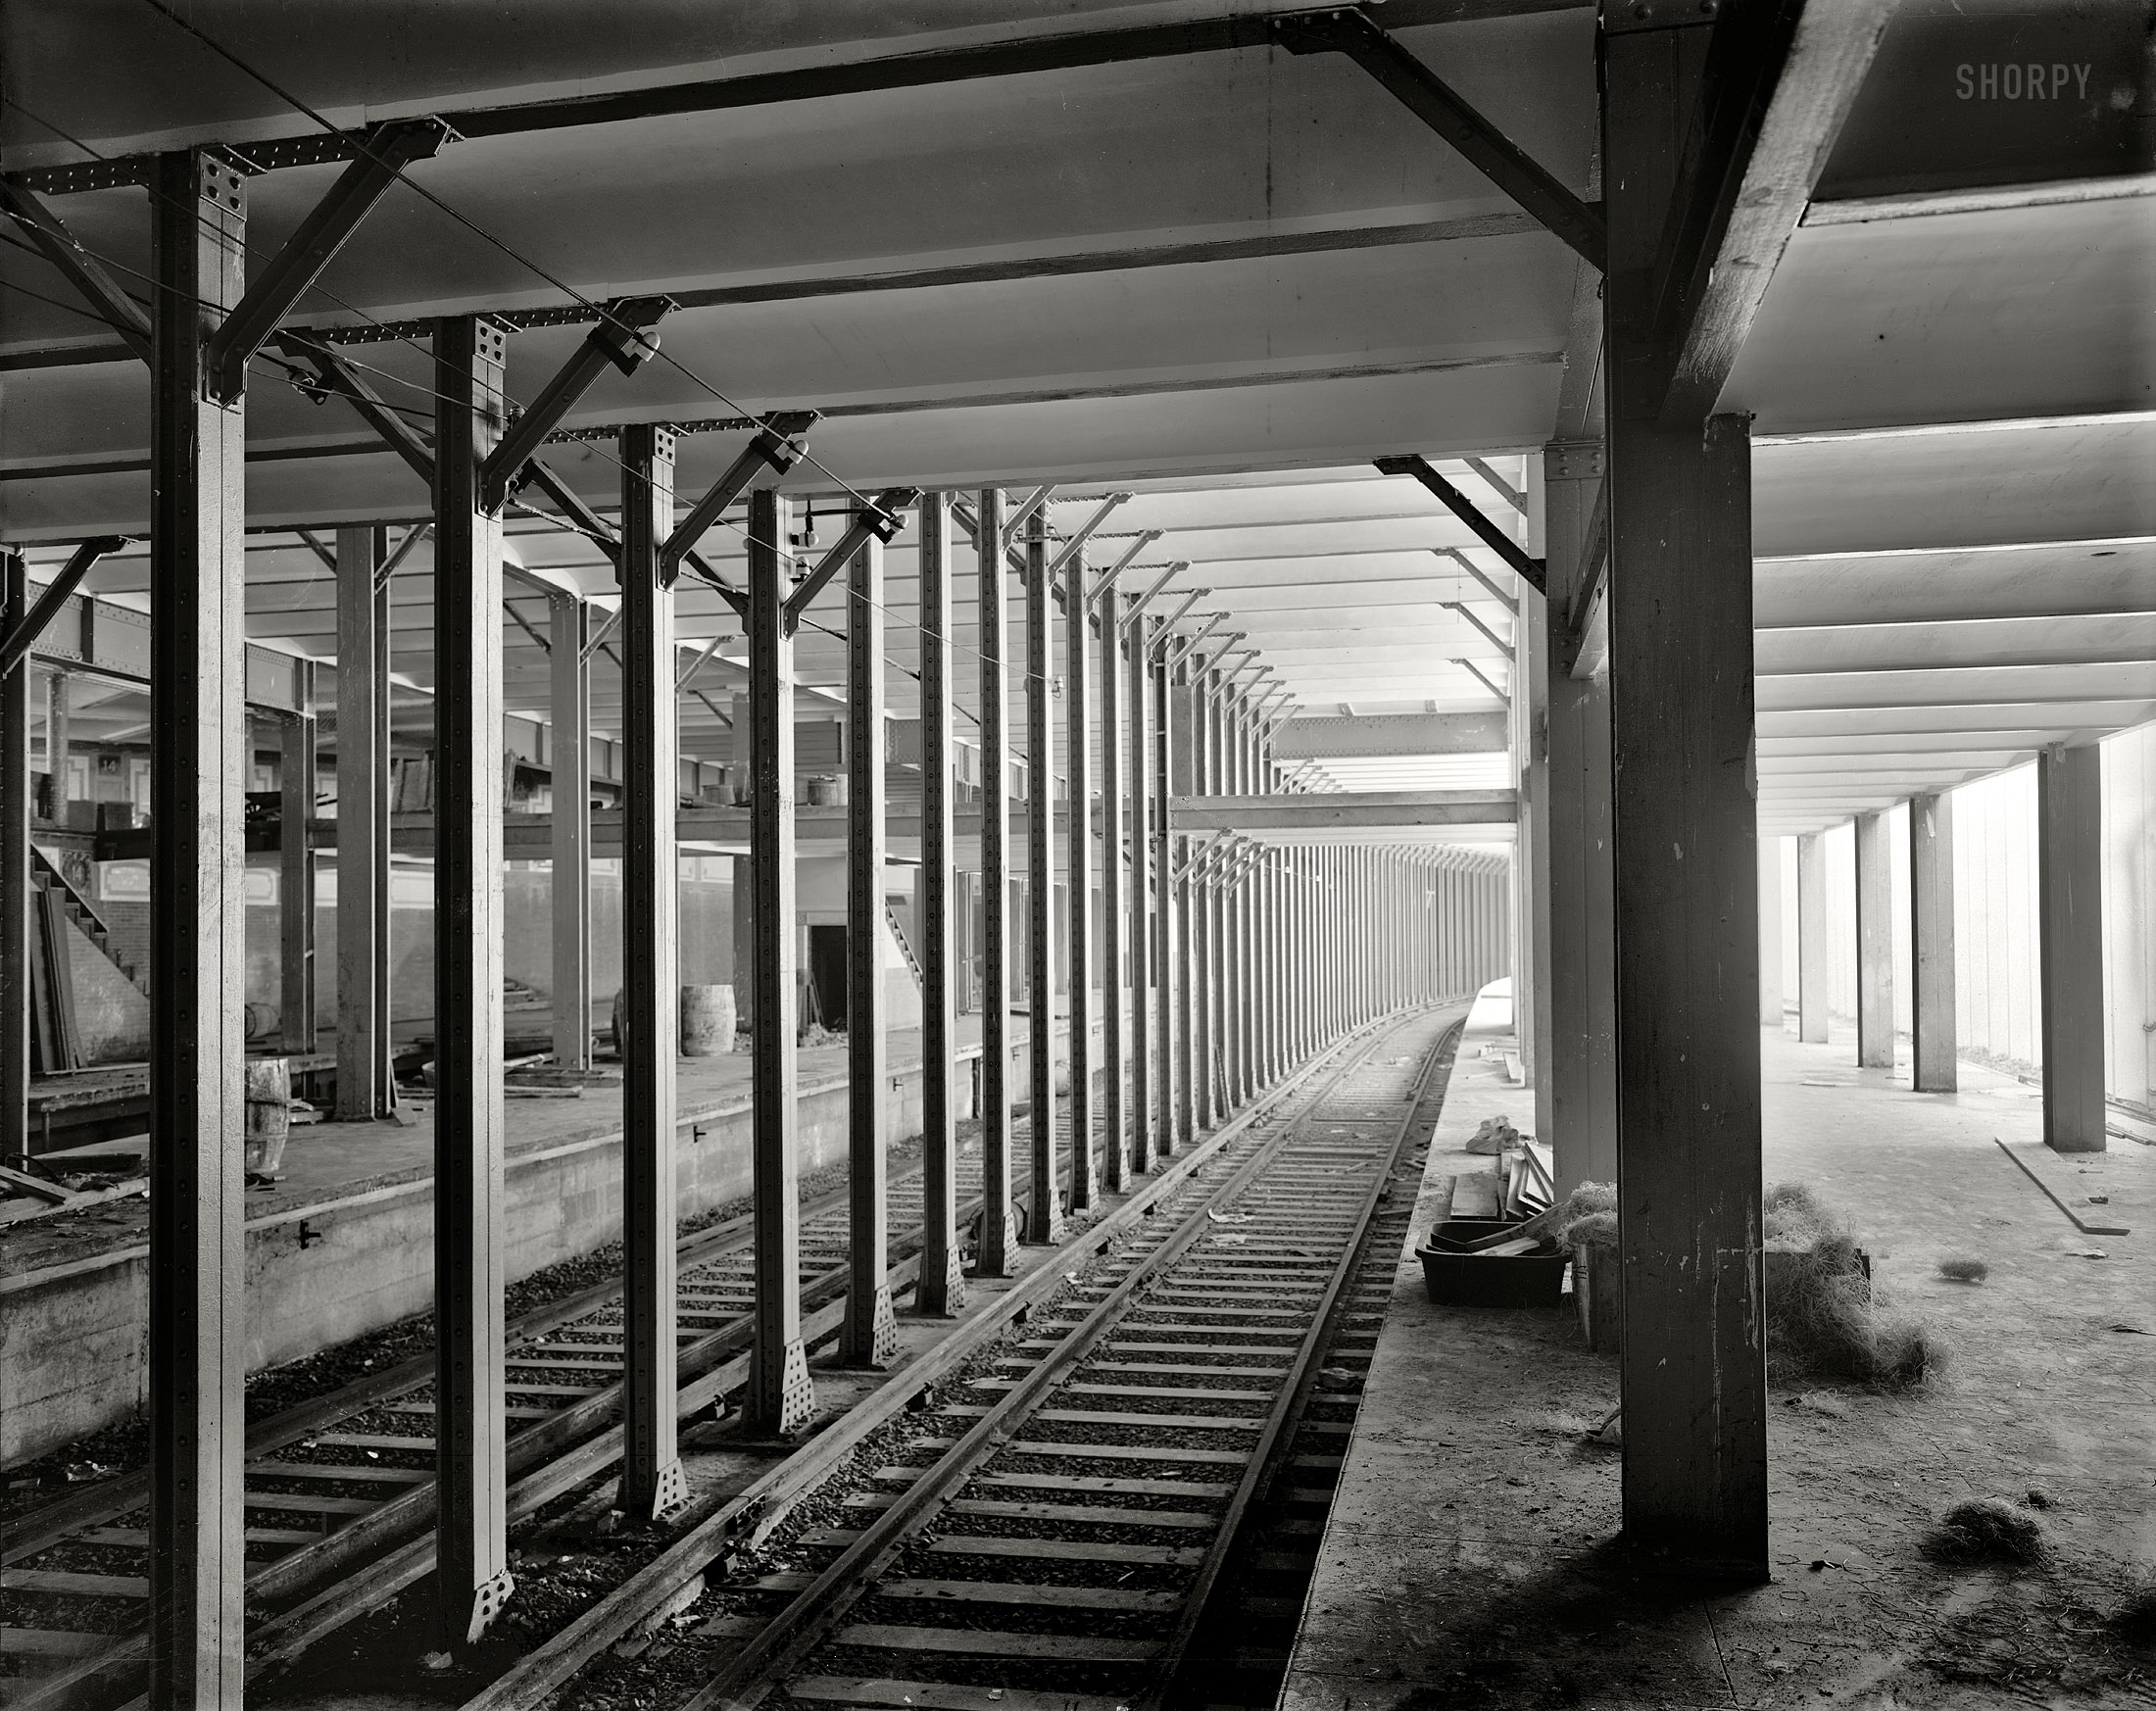 New York circa 1904. "14th Street subway station, construction." 8x10 inch dry plate glass negative, Detroit Publishing Company. View full size.